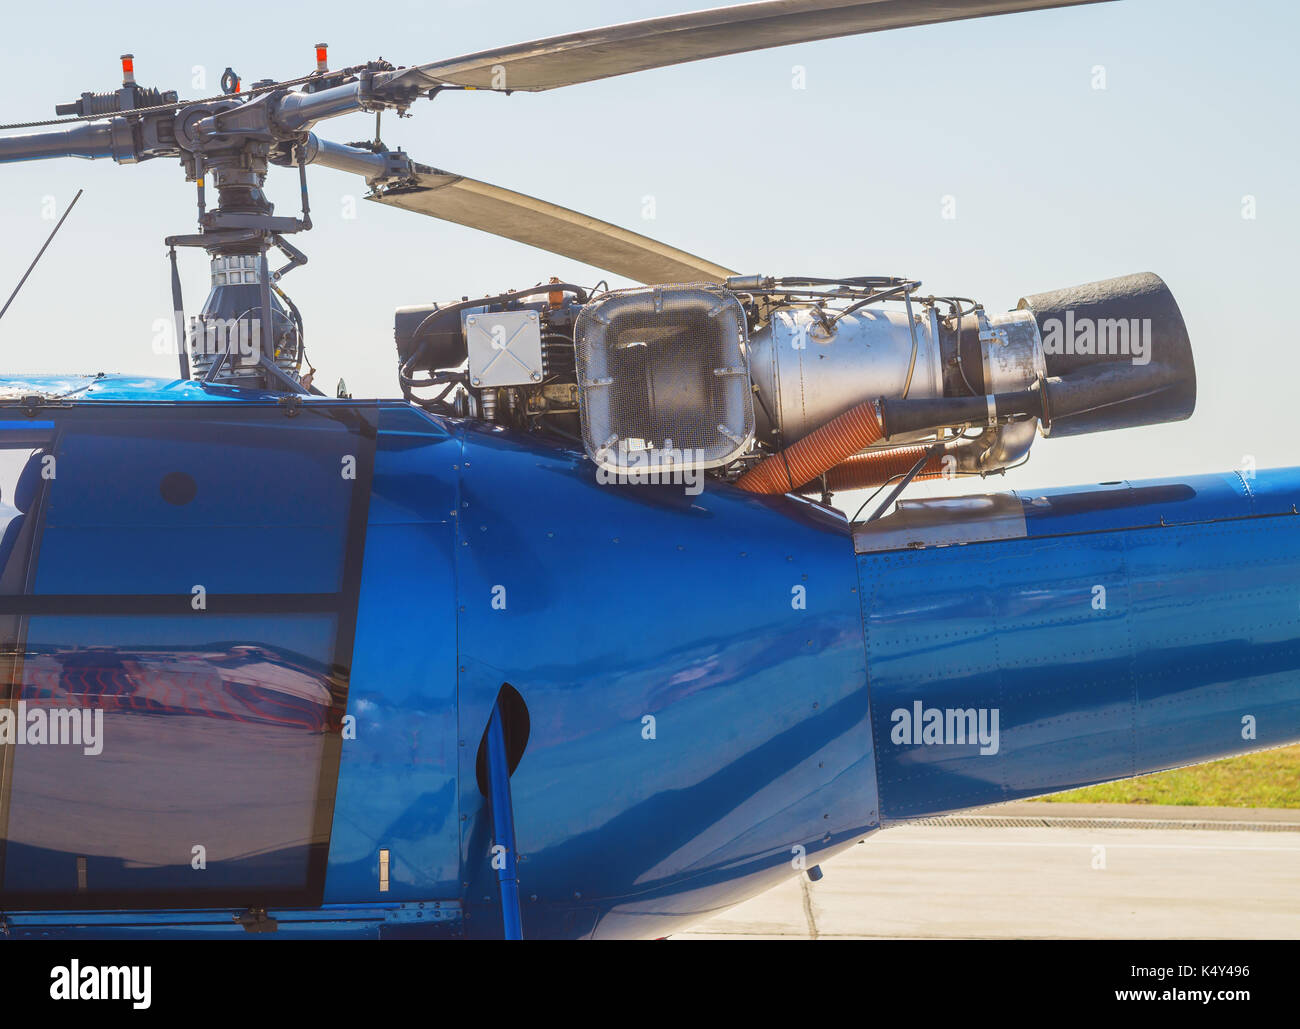 The helicopter Mi2 on the take-off site in the city of Zaporozhye. Stock Photo